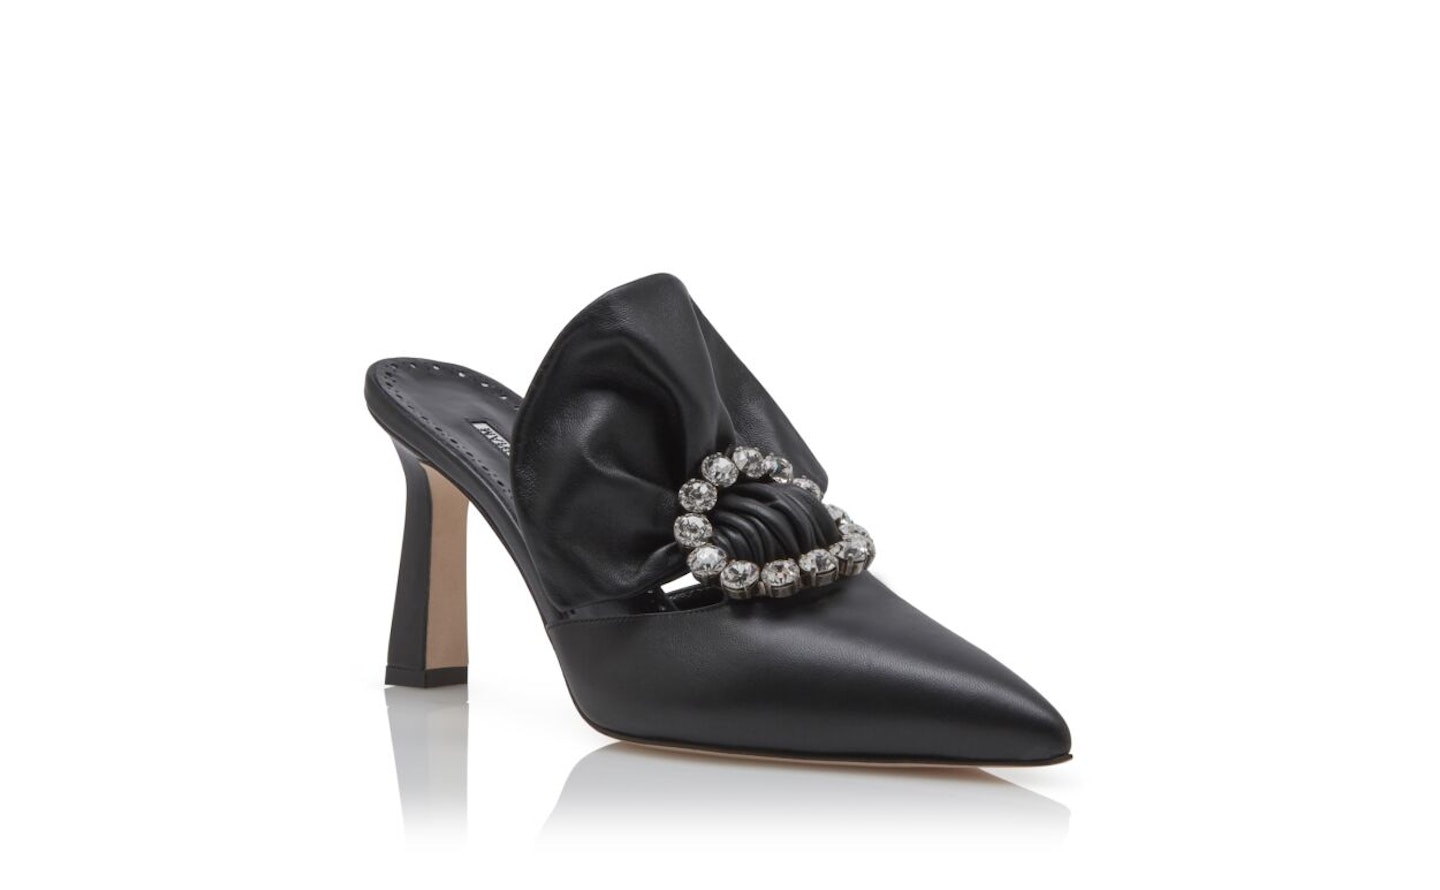 Black Nappa Leather Crystal Buckle Mules, WERE £795 NOW £398